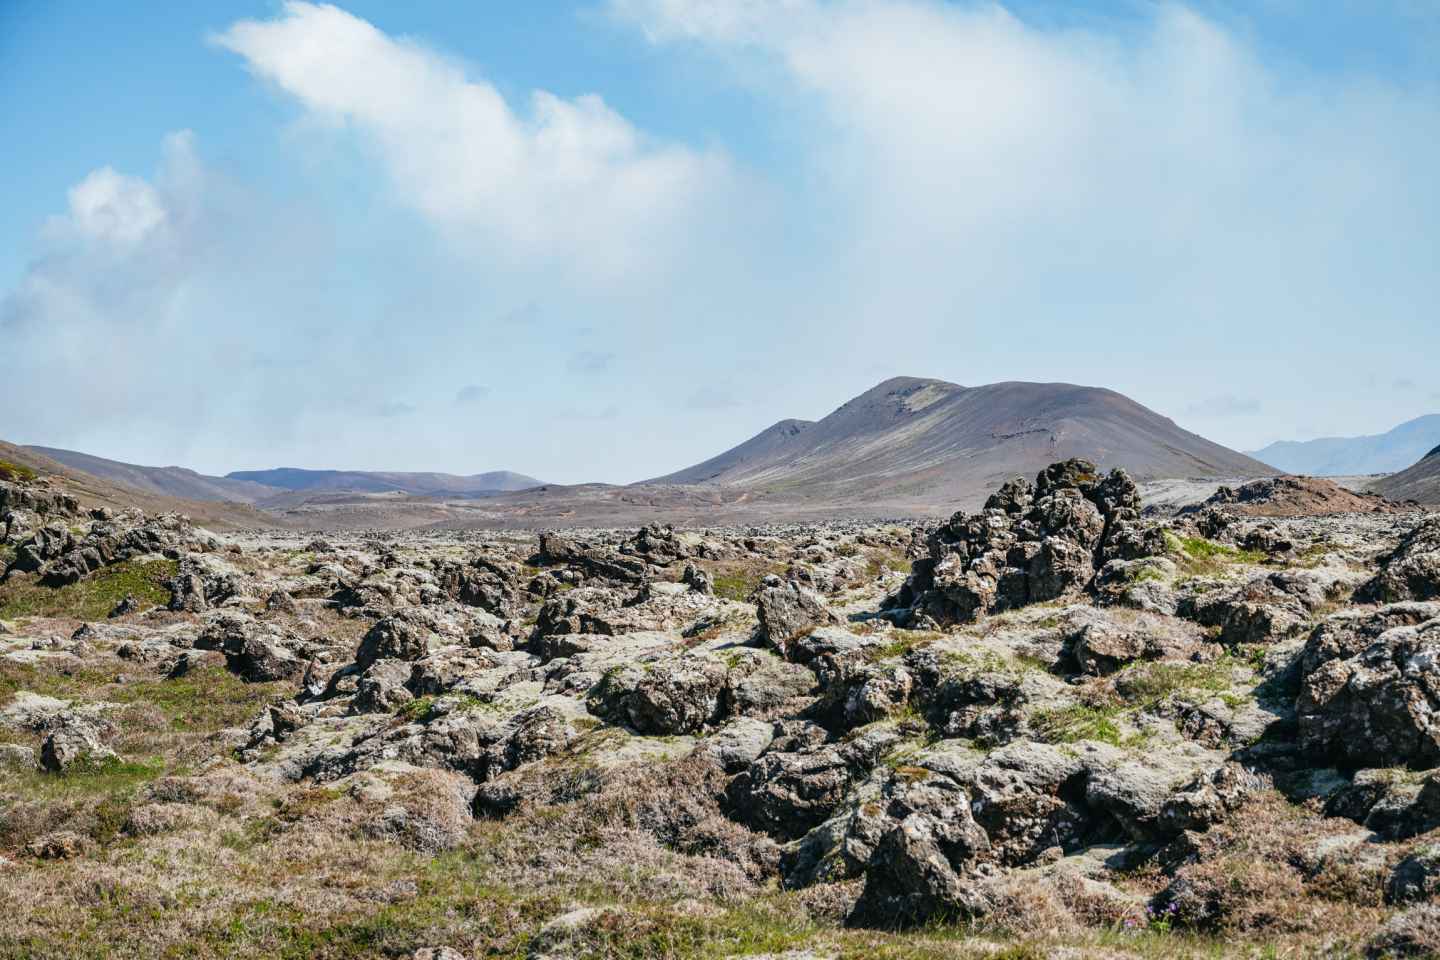 Reykjavik: Guided Tour to Volcano and Reykjanes Geopark